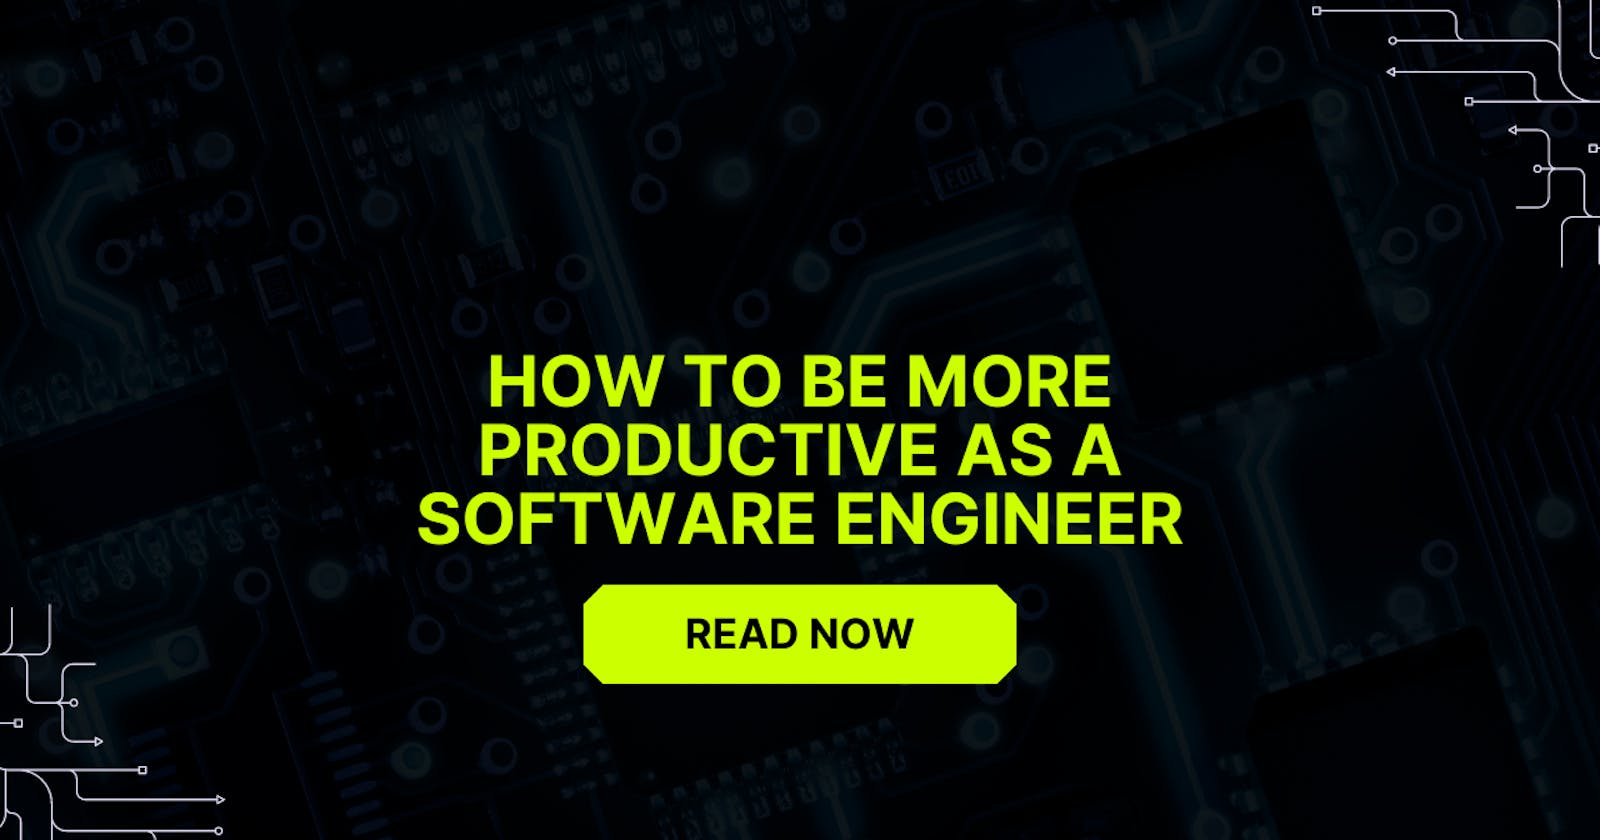 How to Be More Productive as a Software Engineer (It's Not What You Expect)